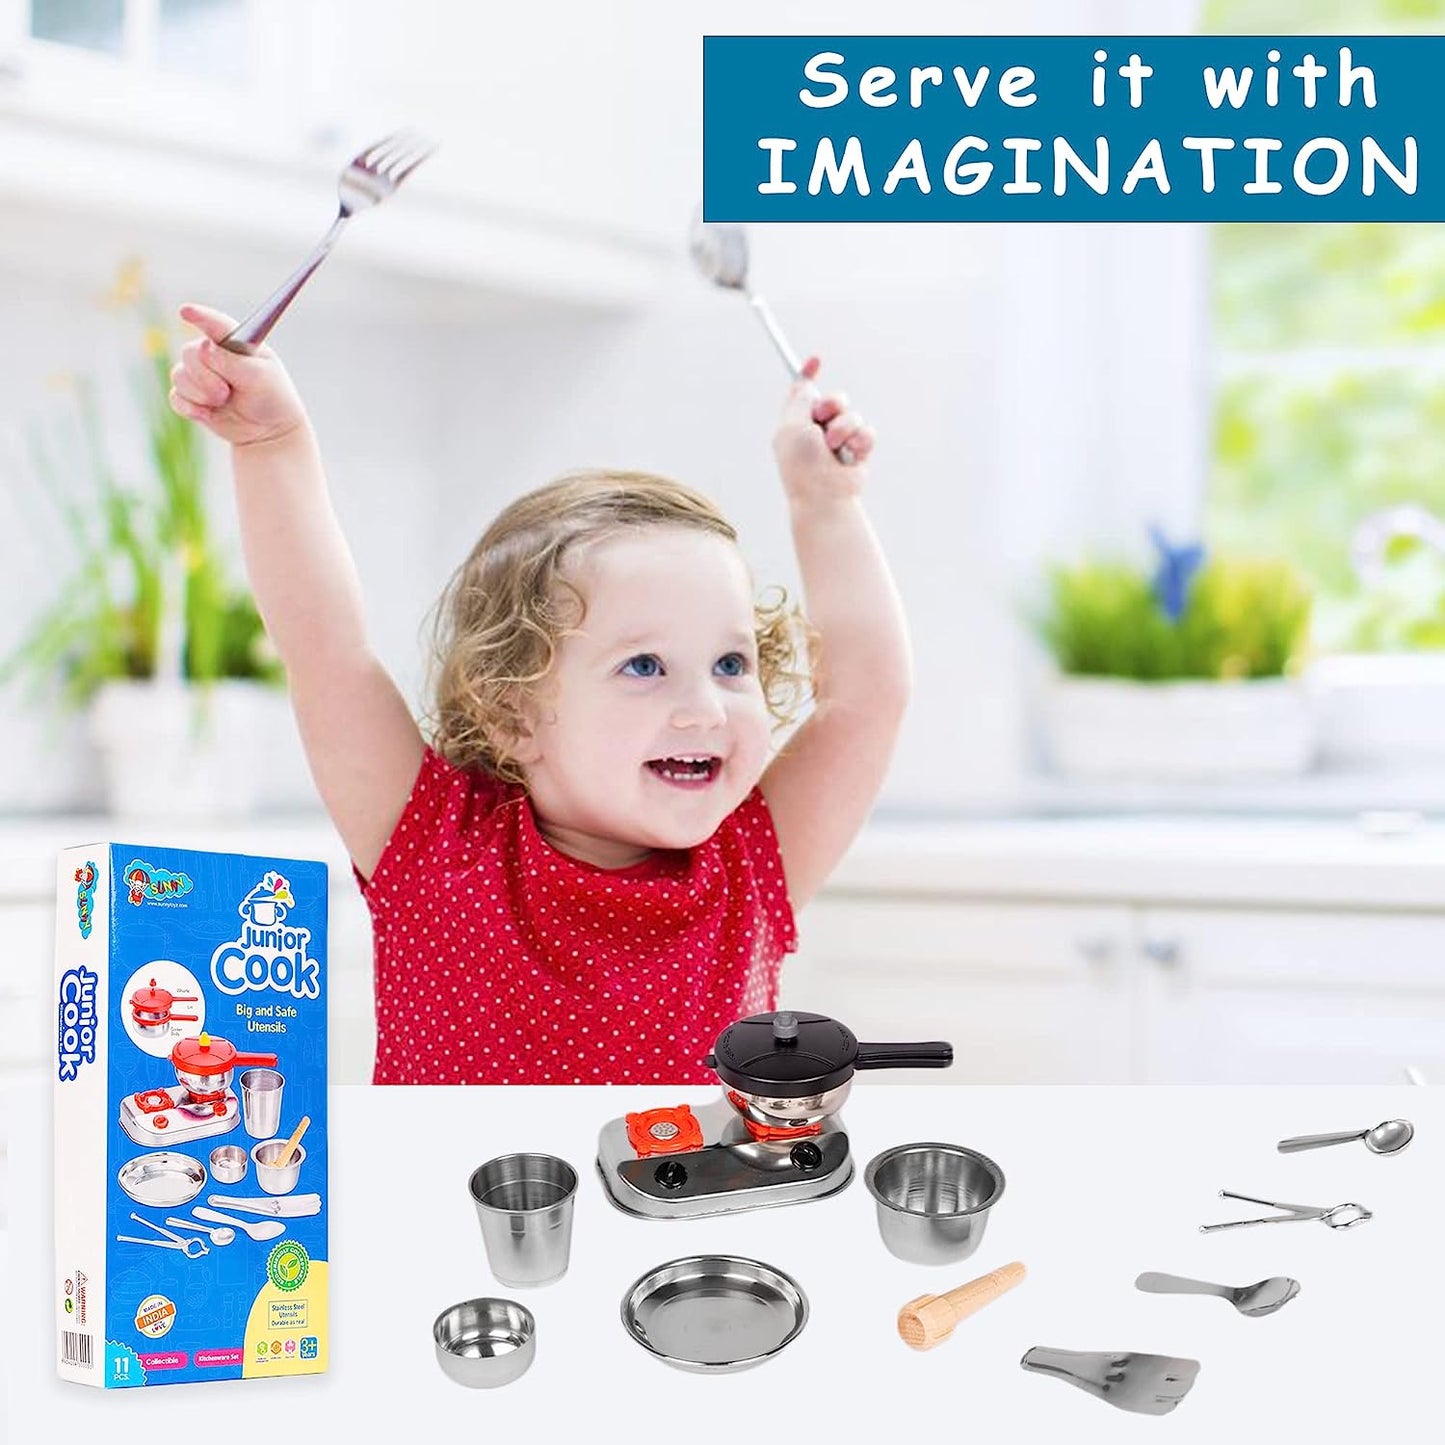 MM Toys Junior Stainles Steel Cook Kitchen Utensils Toy Set 11 Pcs With No Sharp Edges For 3+ Year Kids